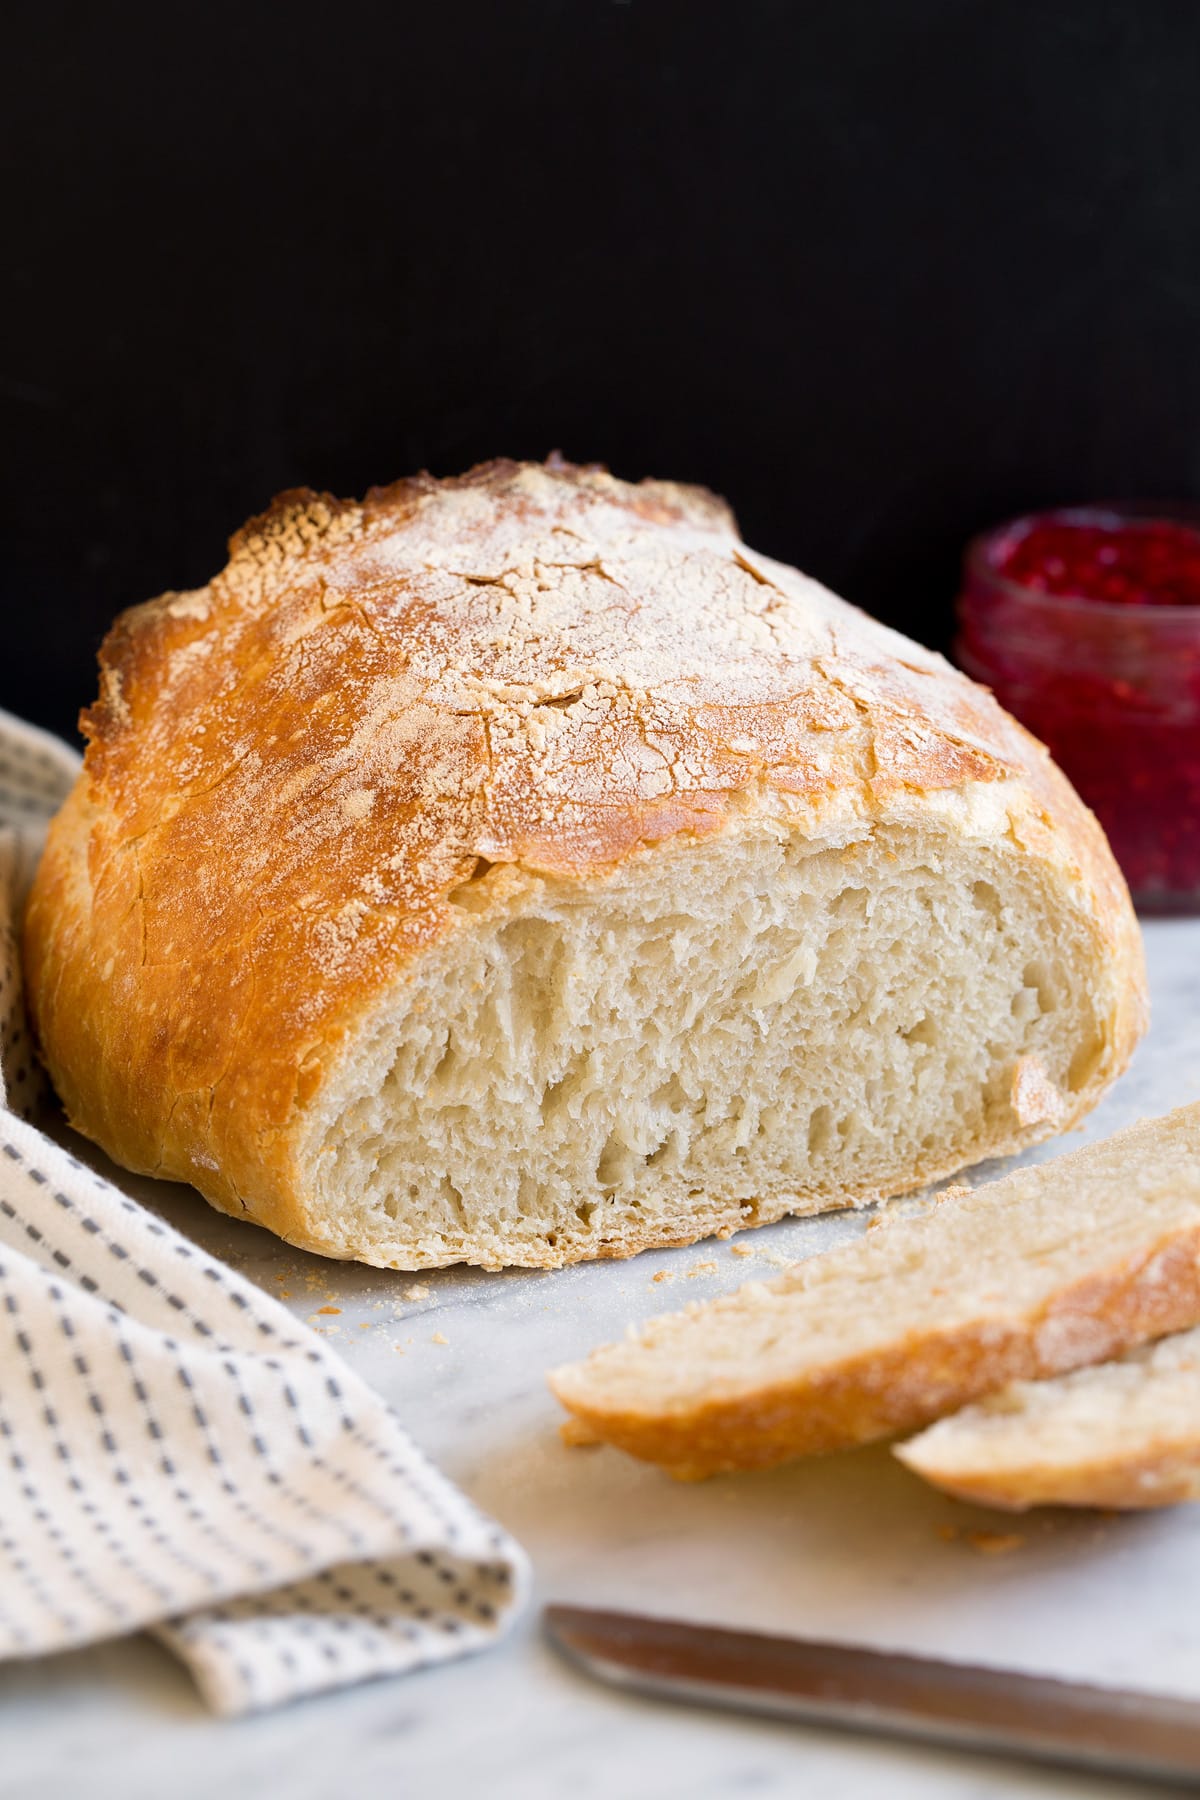 No knead bread shown with a few pieces sliced of to show interior texture.